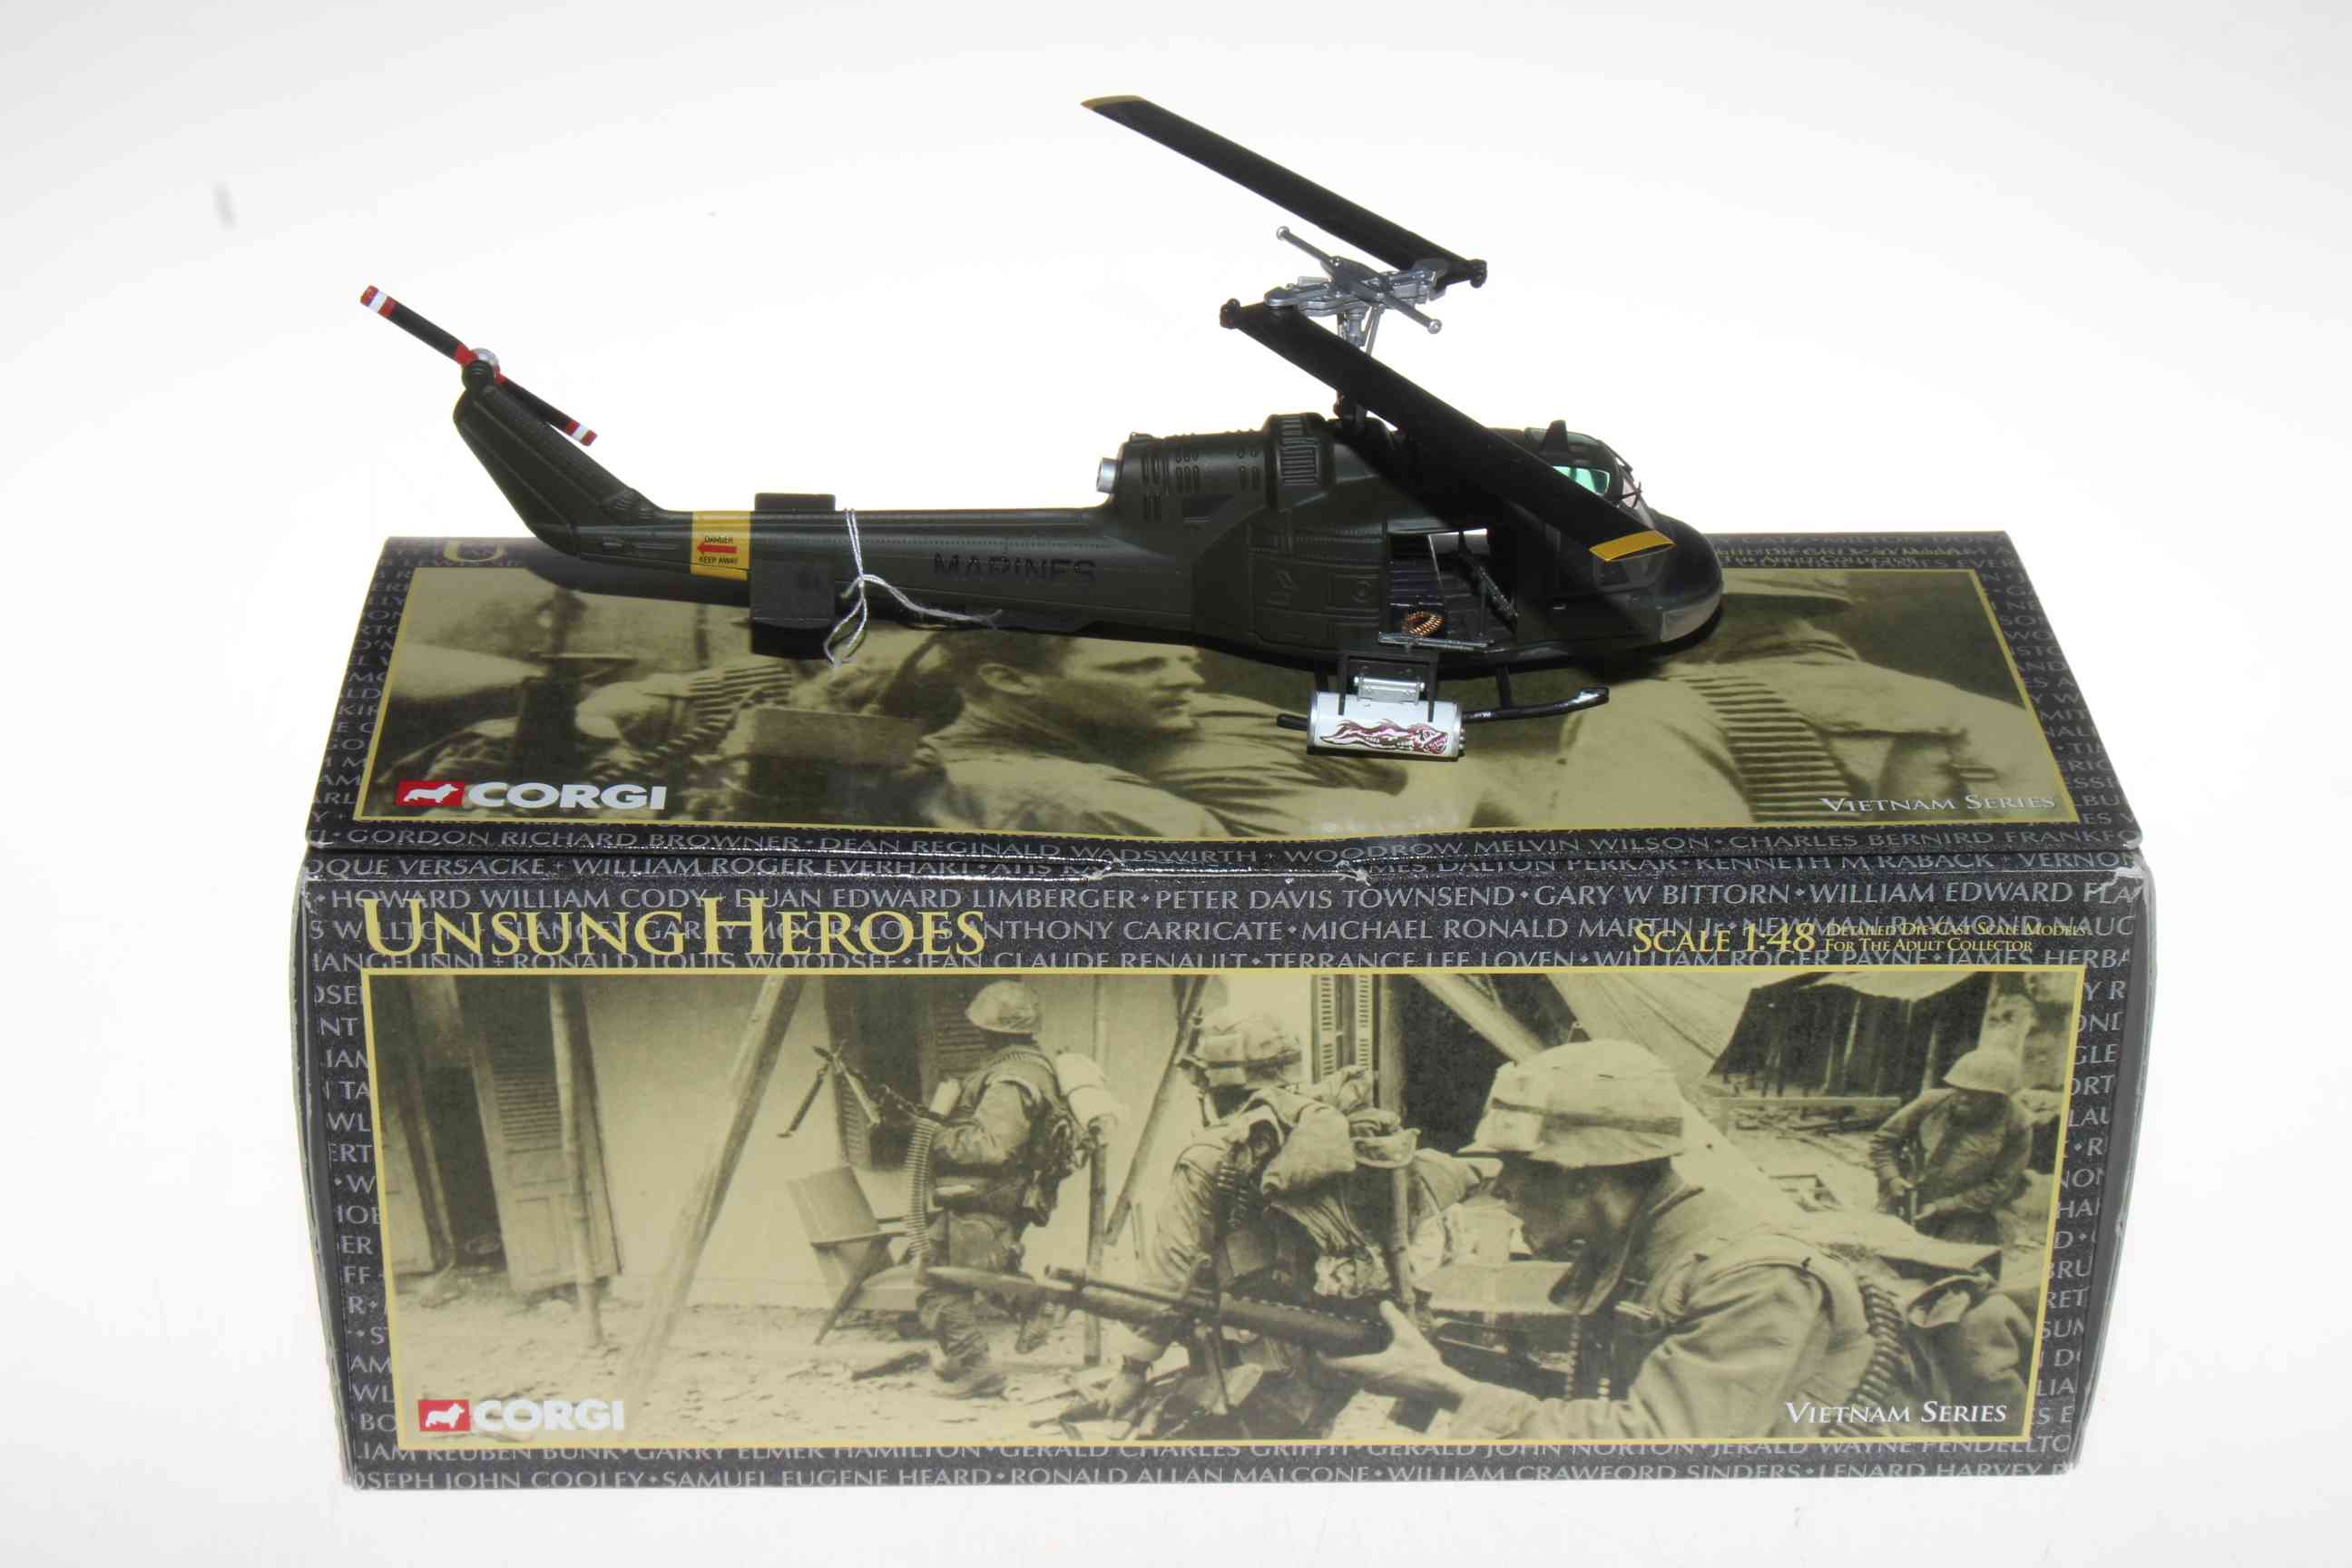 Corgi Unsung Heroes Helicopter model, with box.